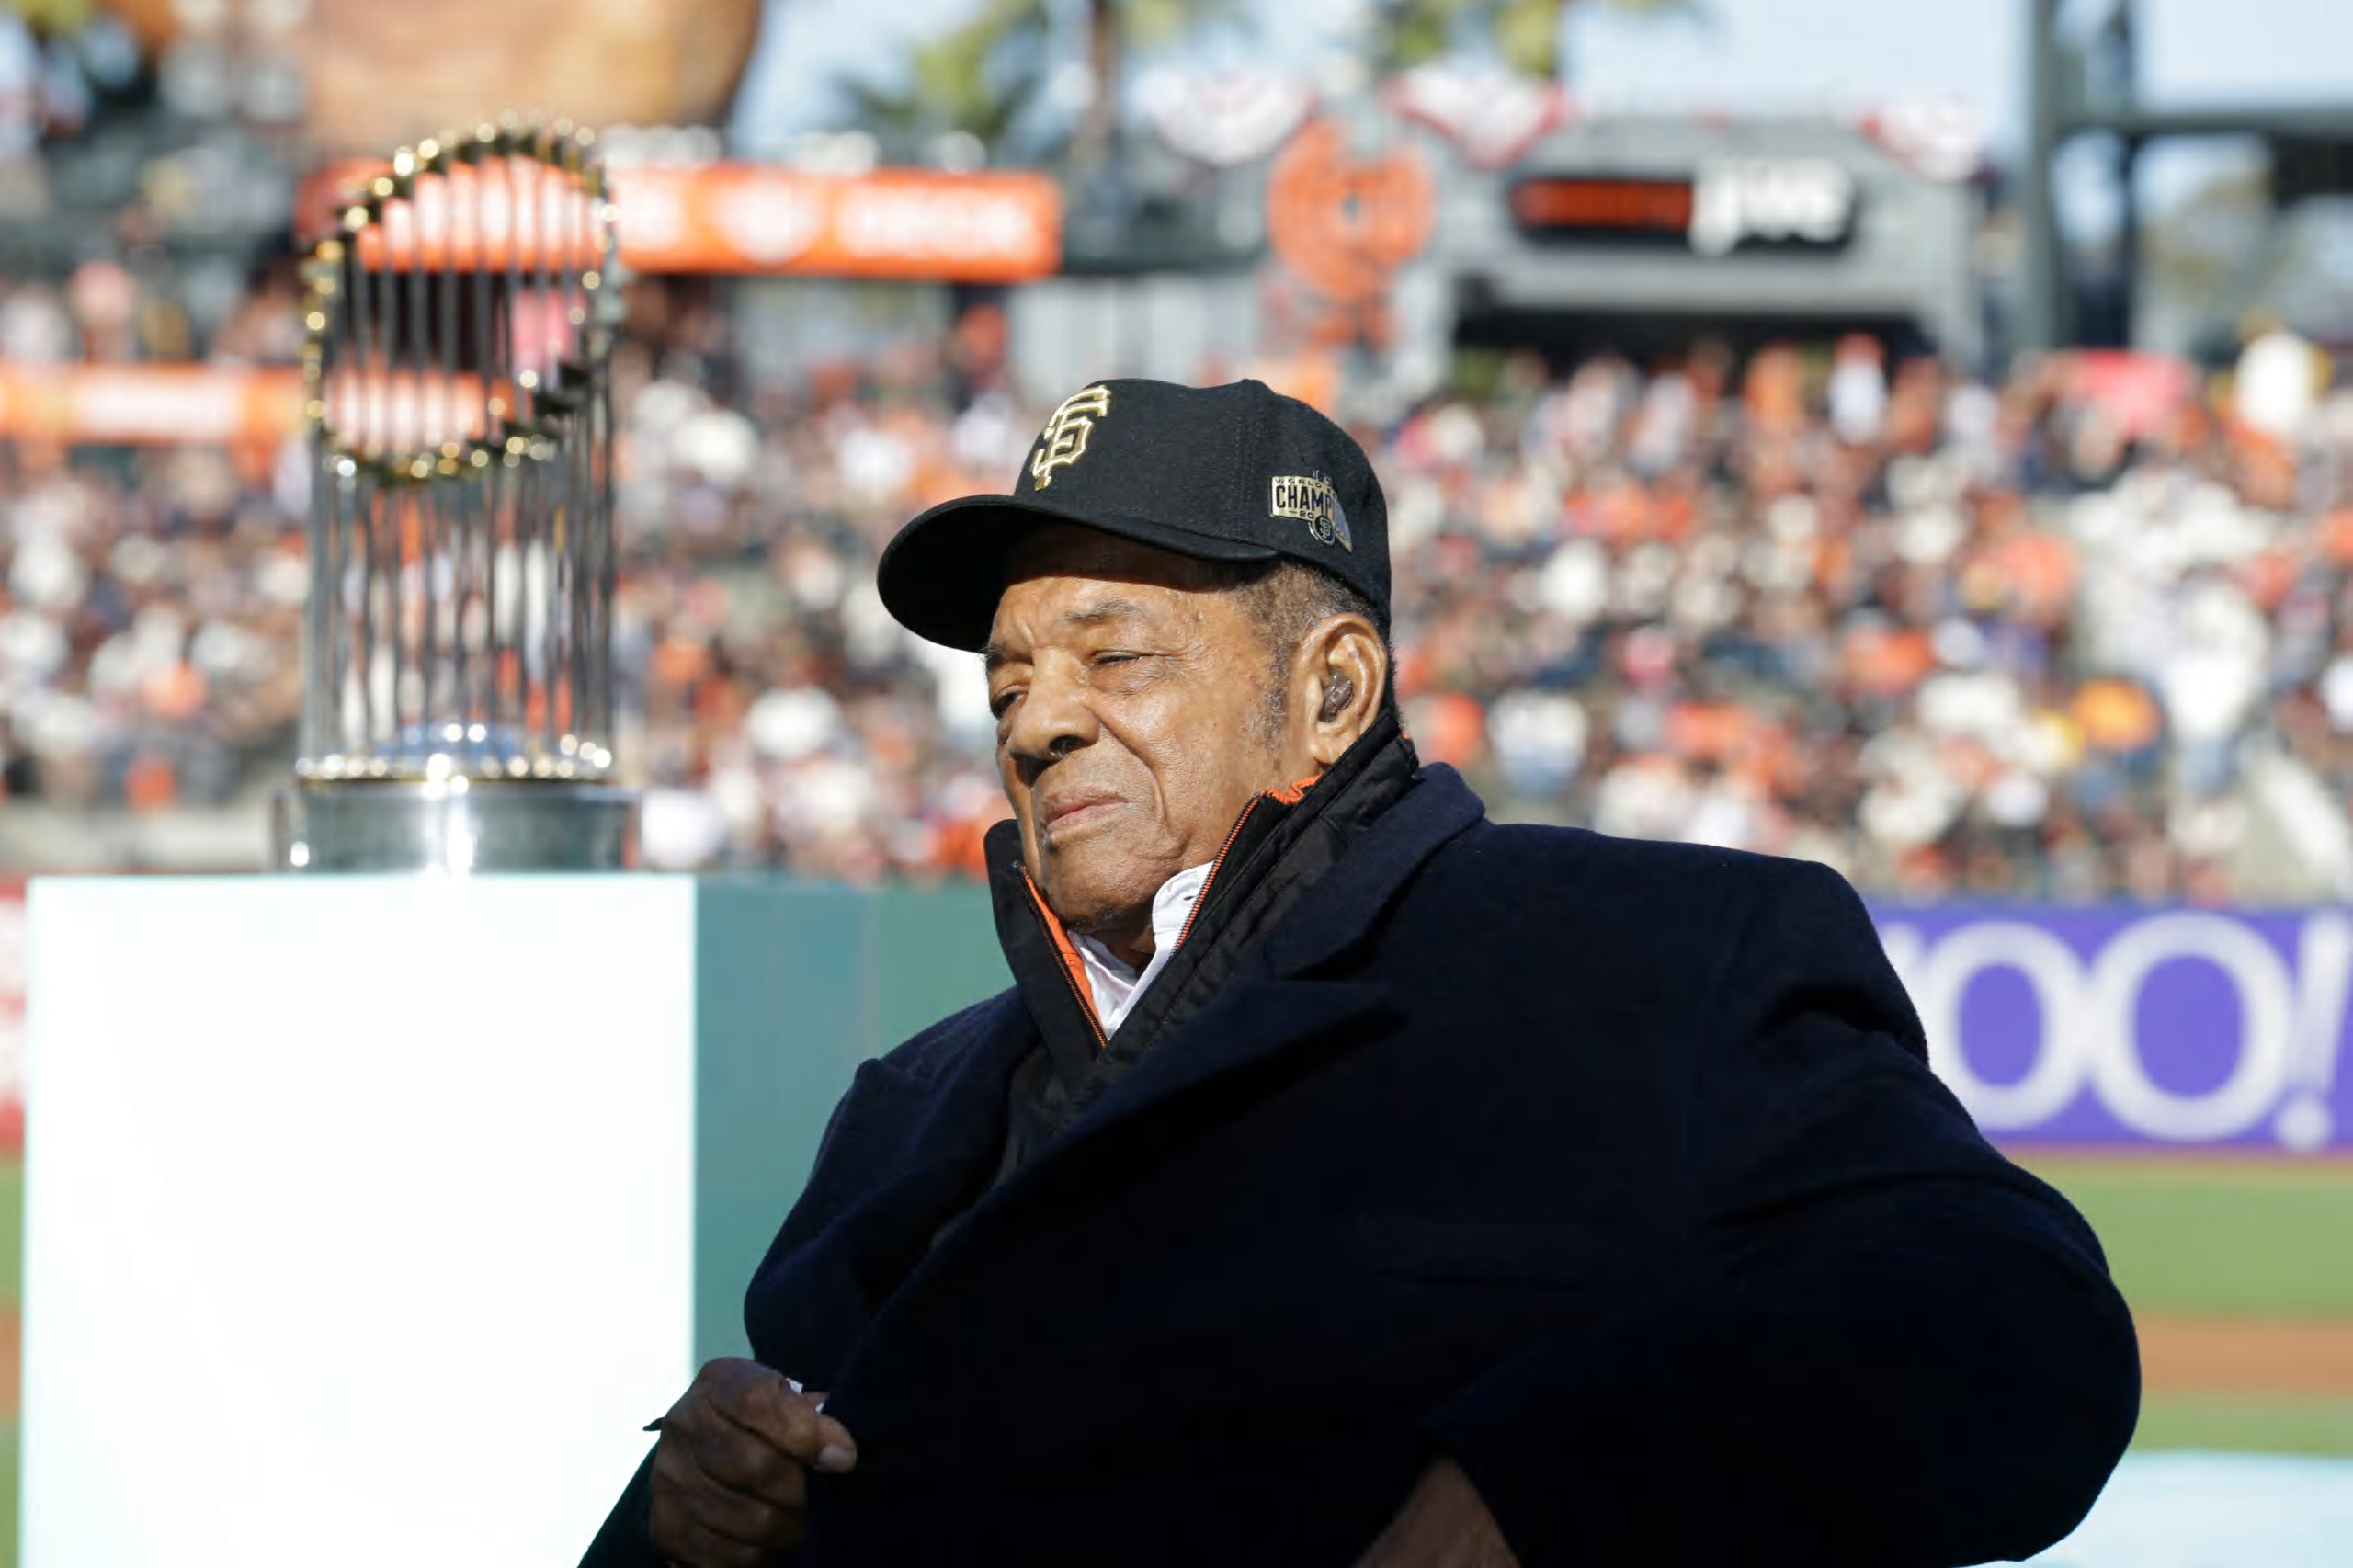 Giants, Mets history: The 10 greatest games played by Willie Mays